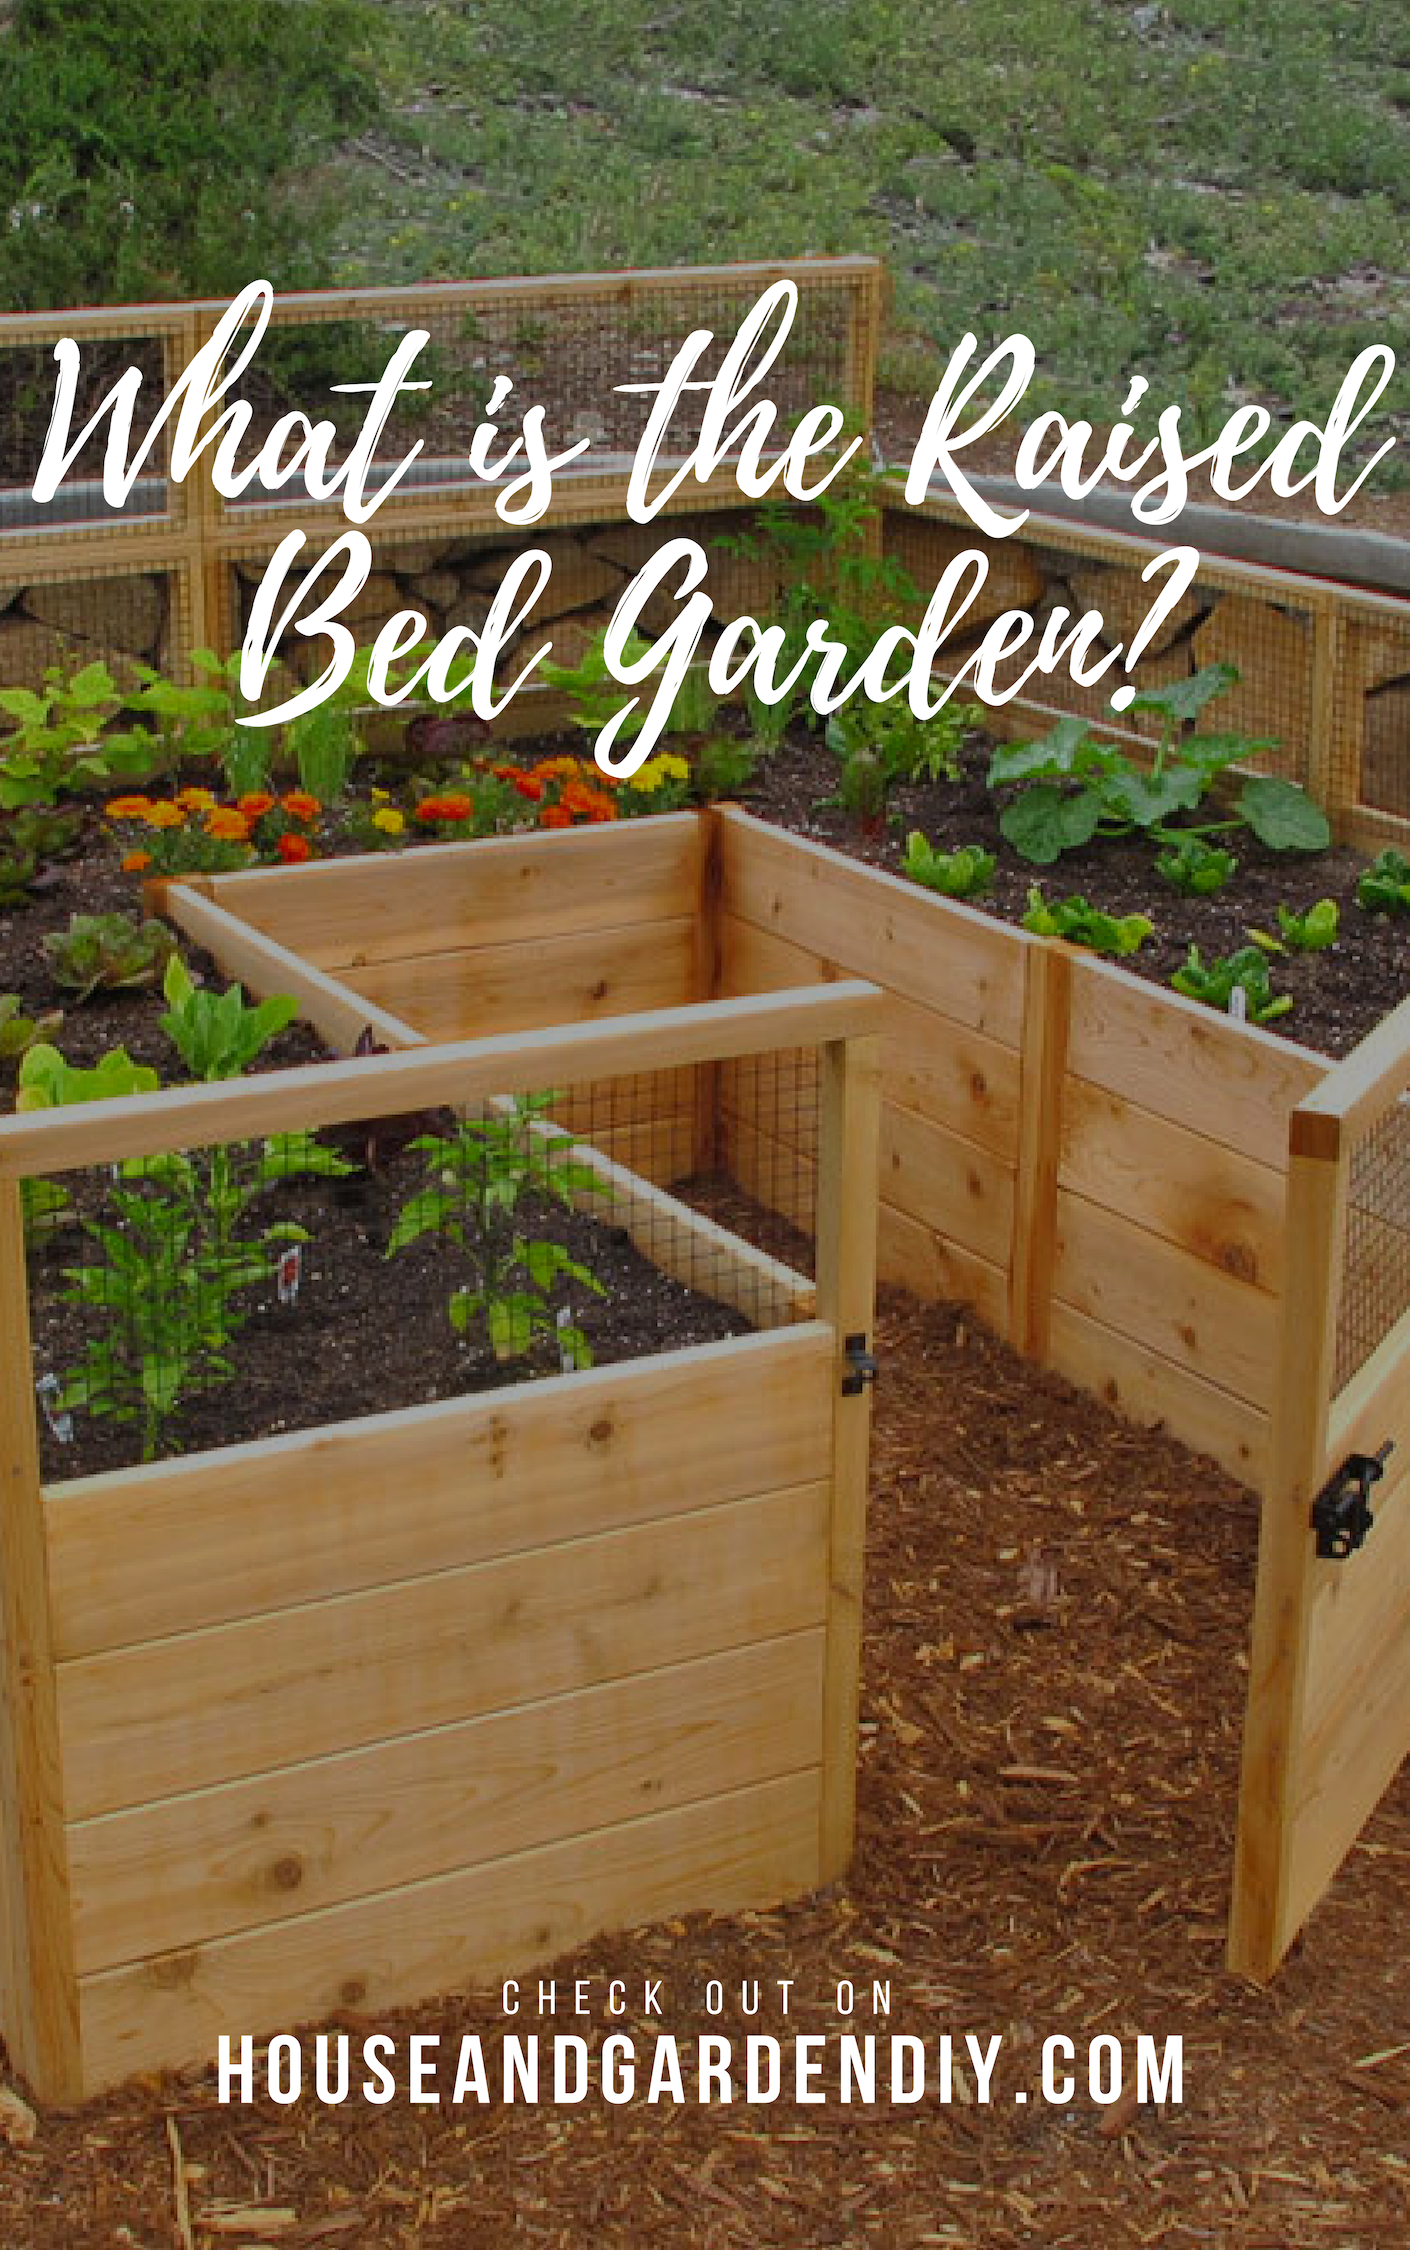 What is the Raised Bed Garden?